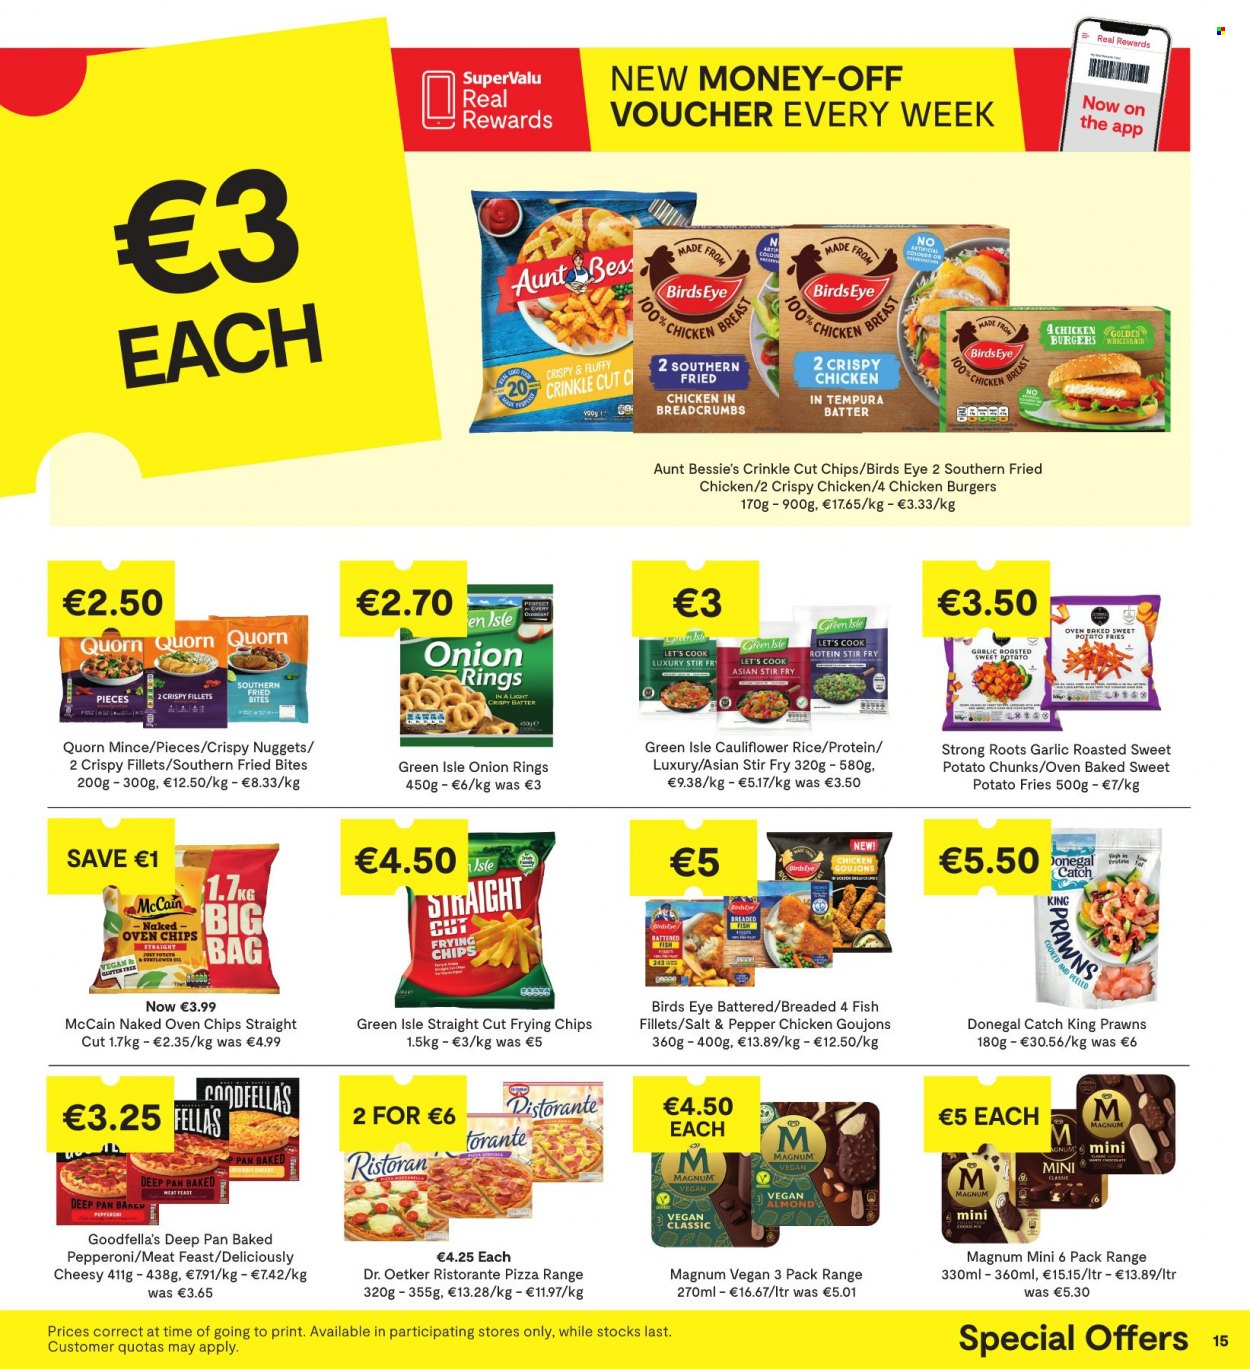 thumbnail - SuperValu offer  - 09.03.2023 - 22.03.2023 - Sales products - Aunt Bessie's, garlic, sweet potato, fish fillets, prawns, fish, pizza, onion rings, nuggets, hamburger, fried chicken, Bird's Eye, breaded fish, pepperoni, Dr. Oetker, Donegal Catch, McCain, frozen chips, sweet potato fries, white chocolate, chocolate. Page 16.